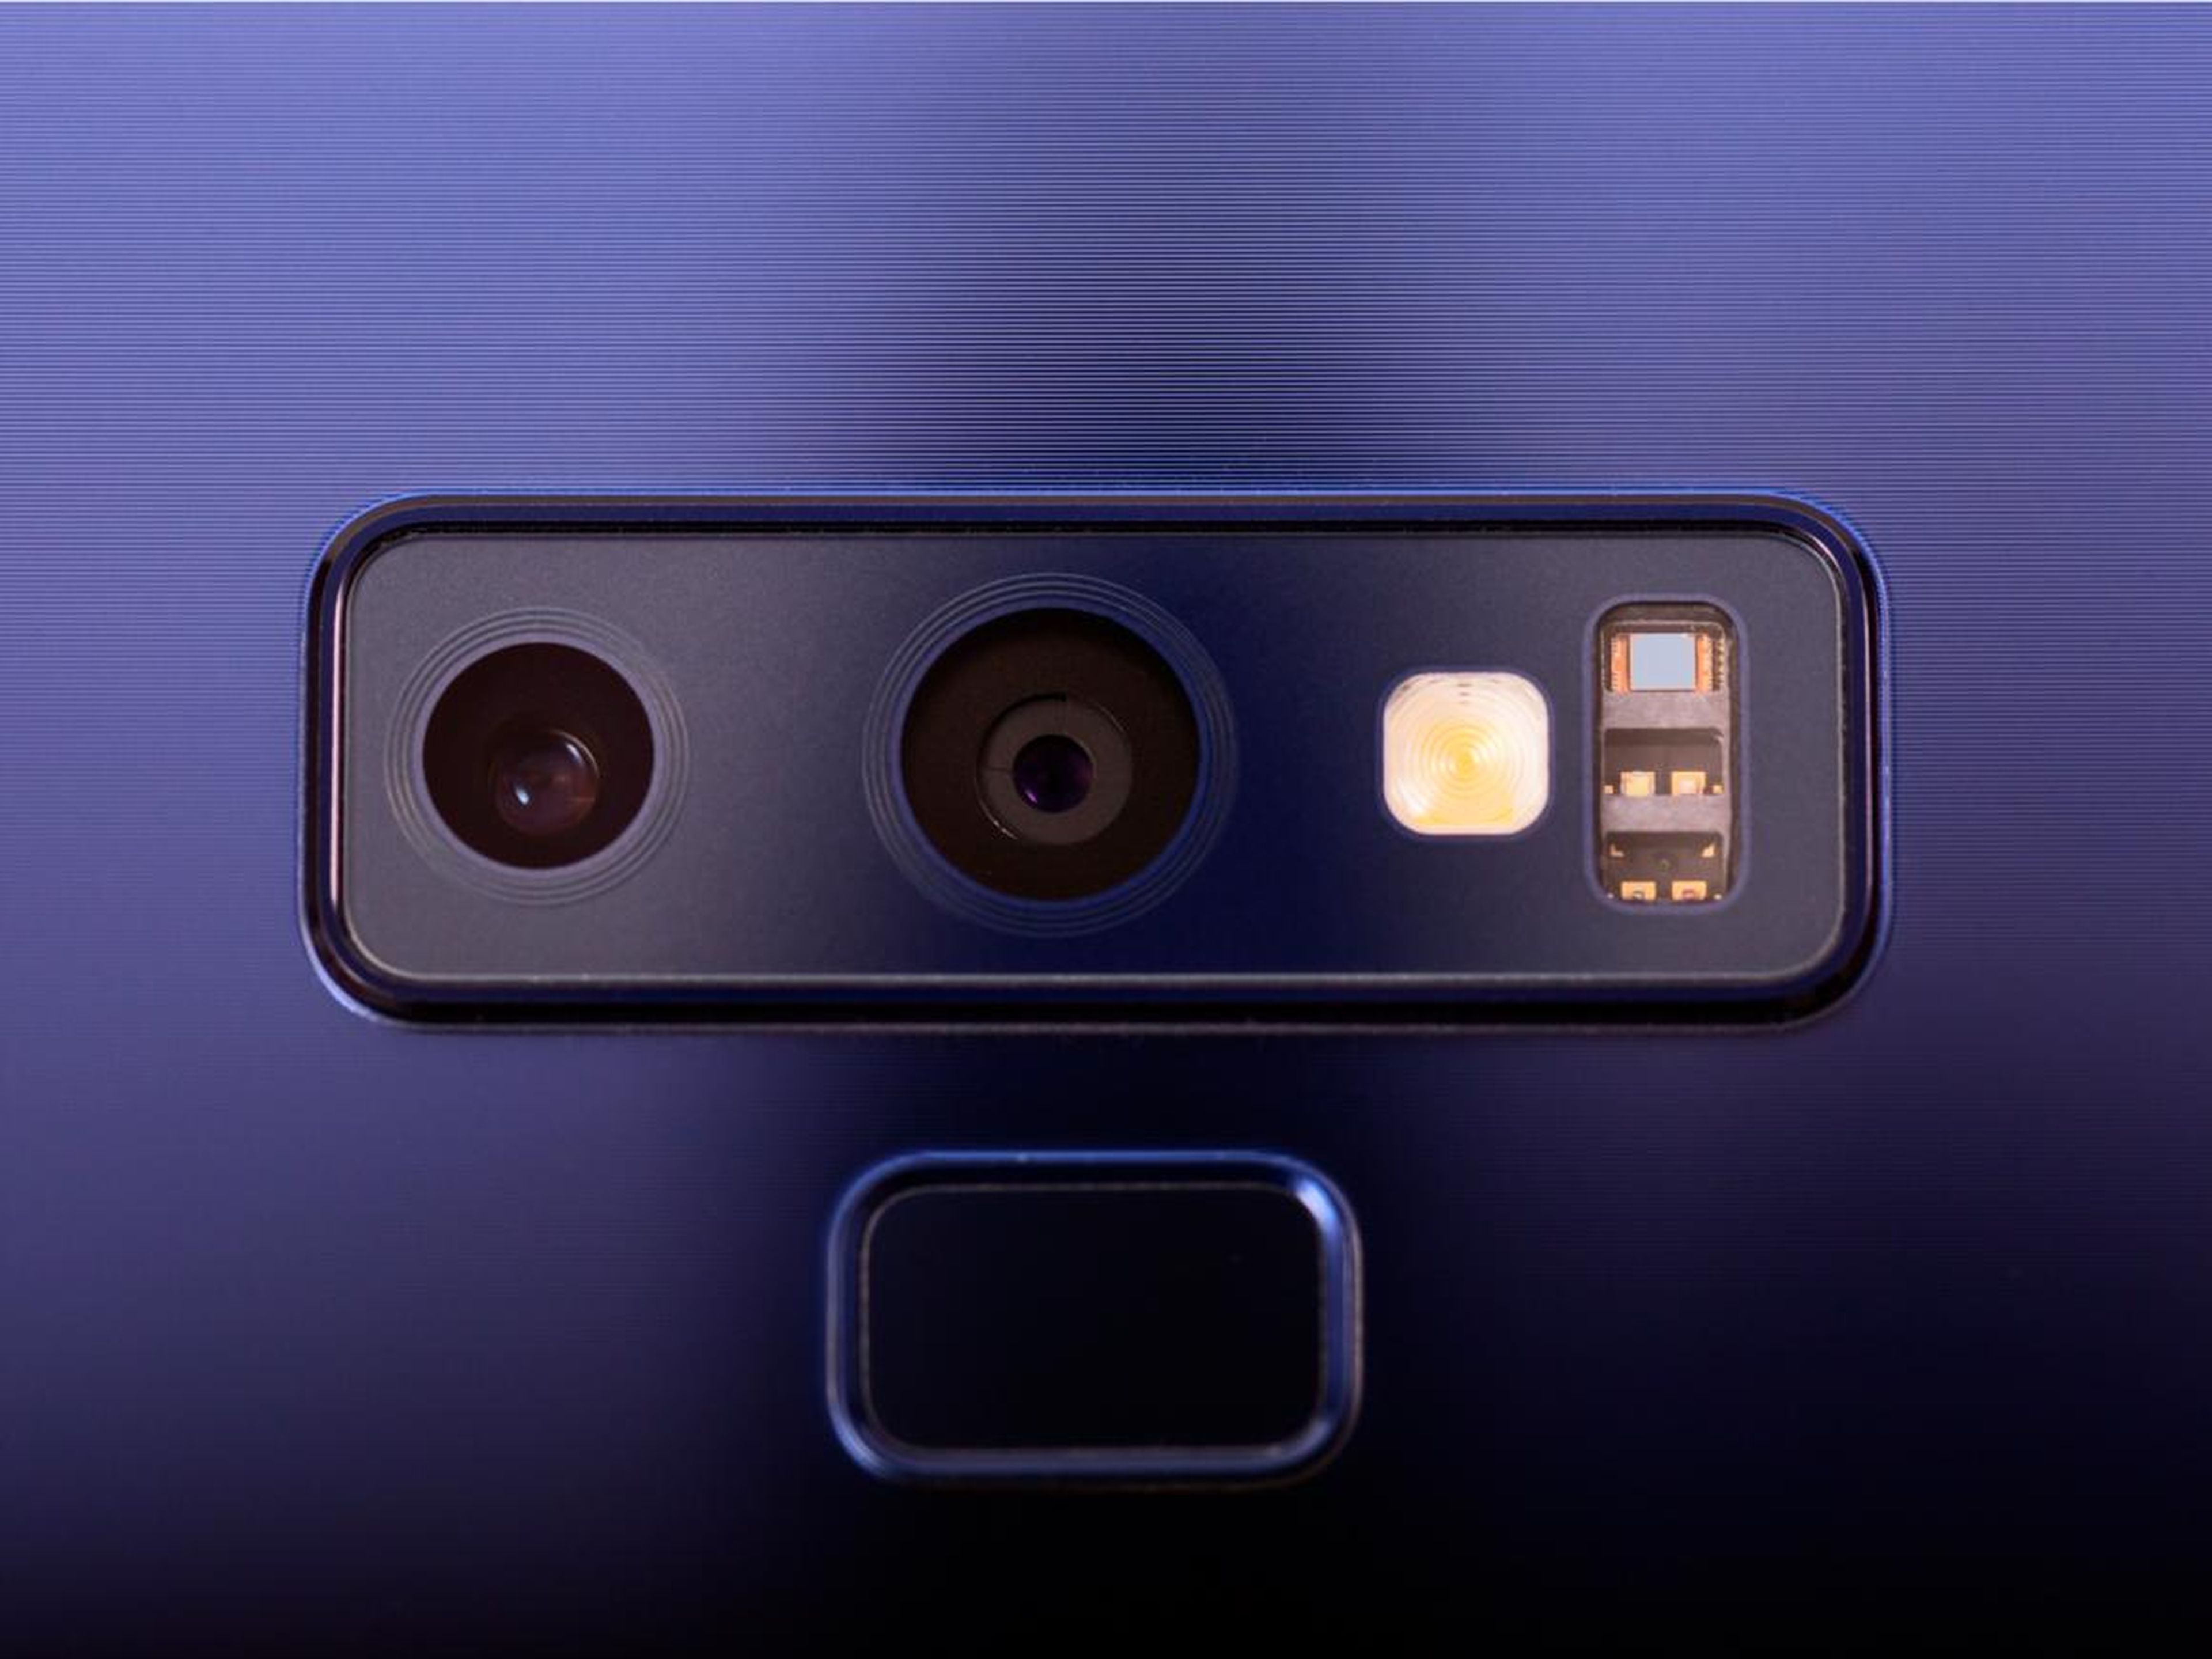 But the rear cameras on the three phones are slightly different.